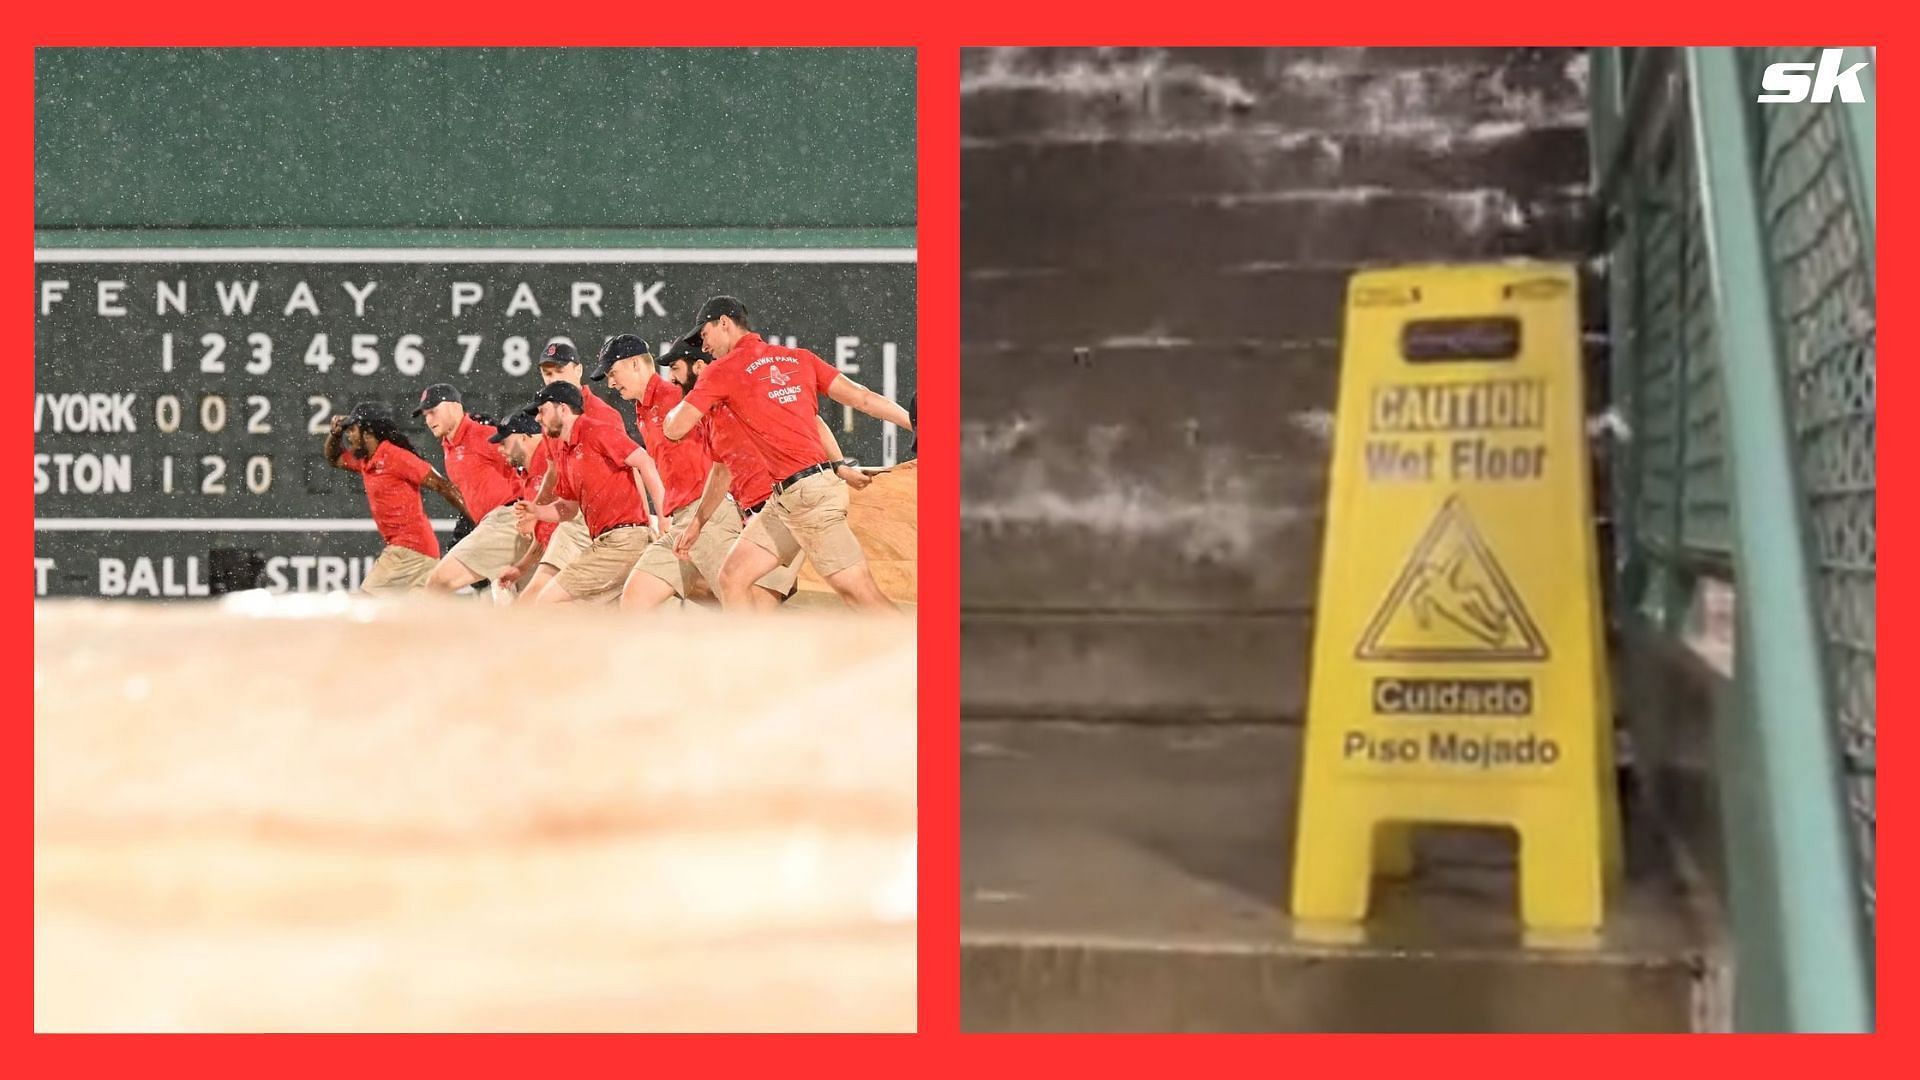 Red Sox fans take advantage of flooded Fenway Park during rain delay